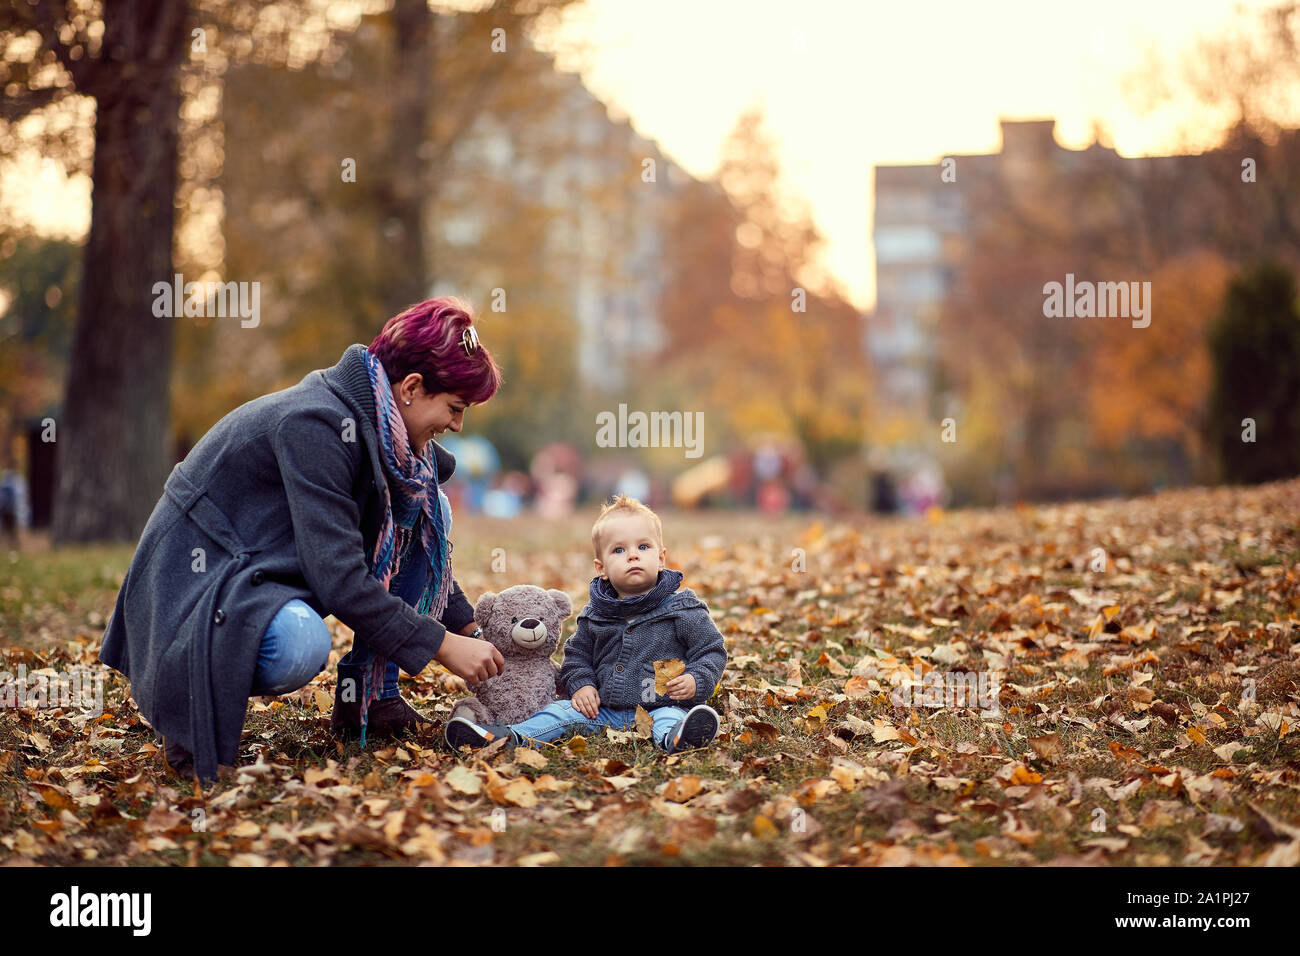 Mother child boy playing, smiling and having fun in autumn city park. Bright yellow trees and leaves Stock Photo